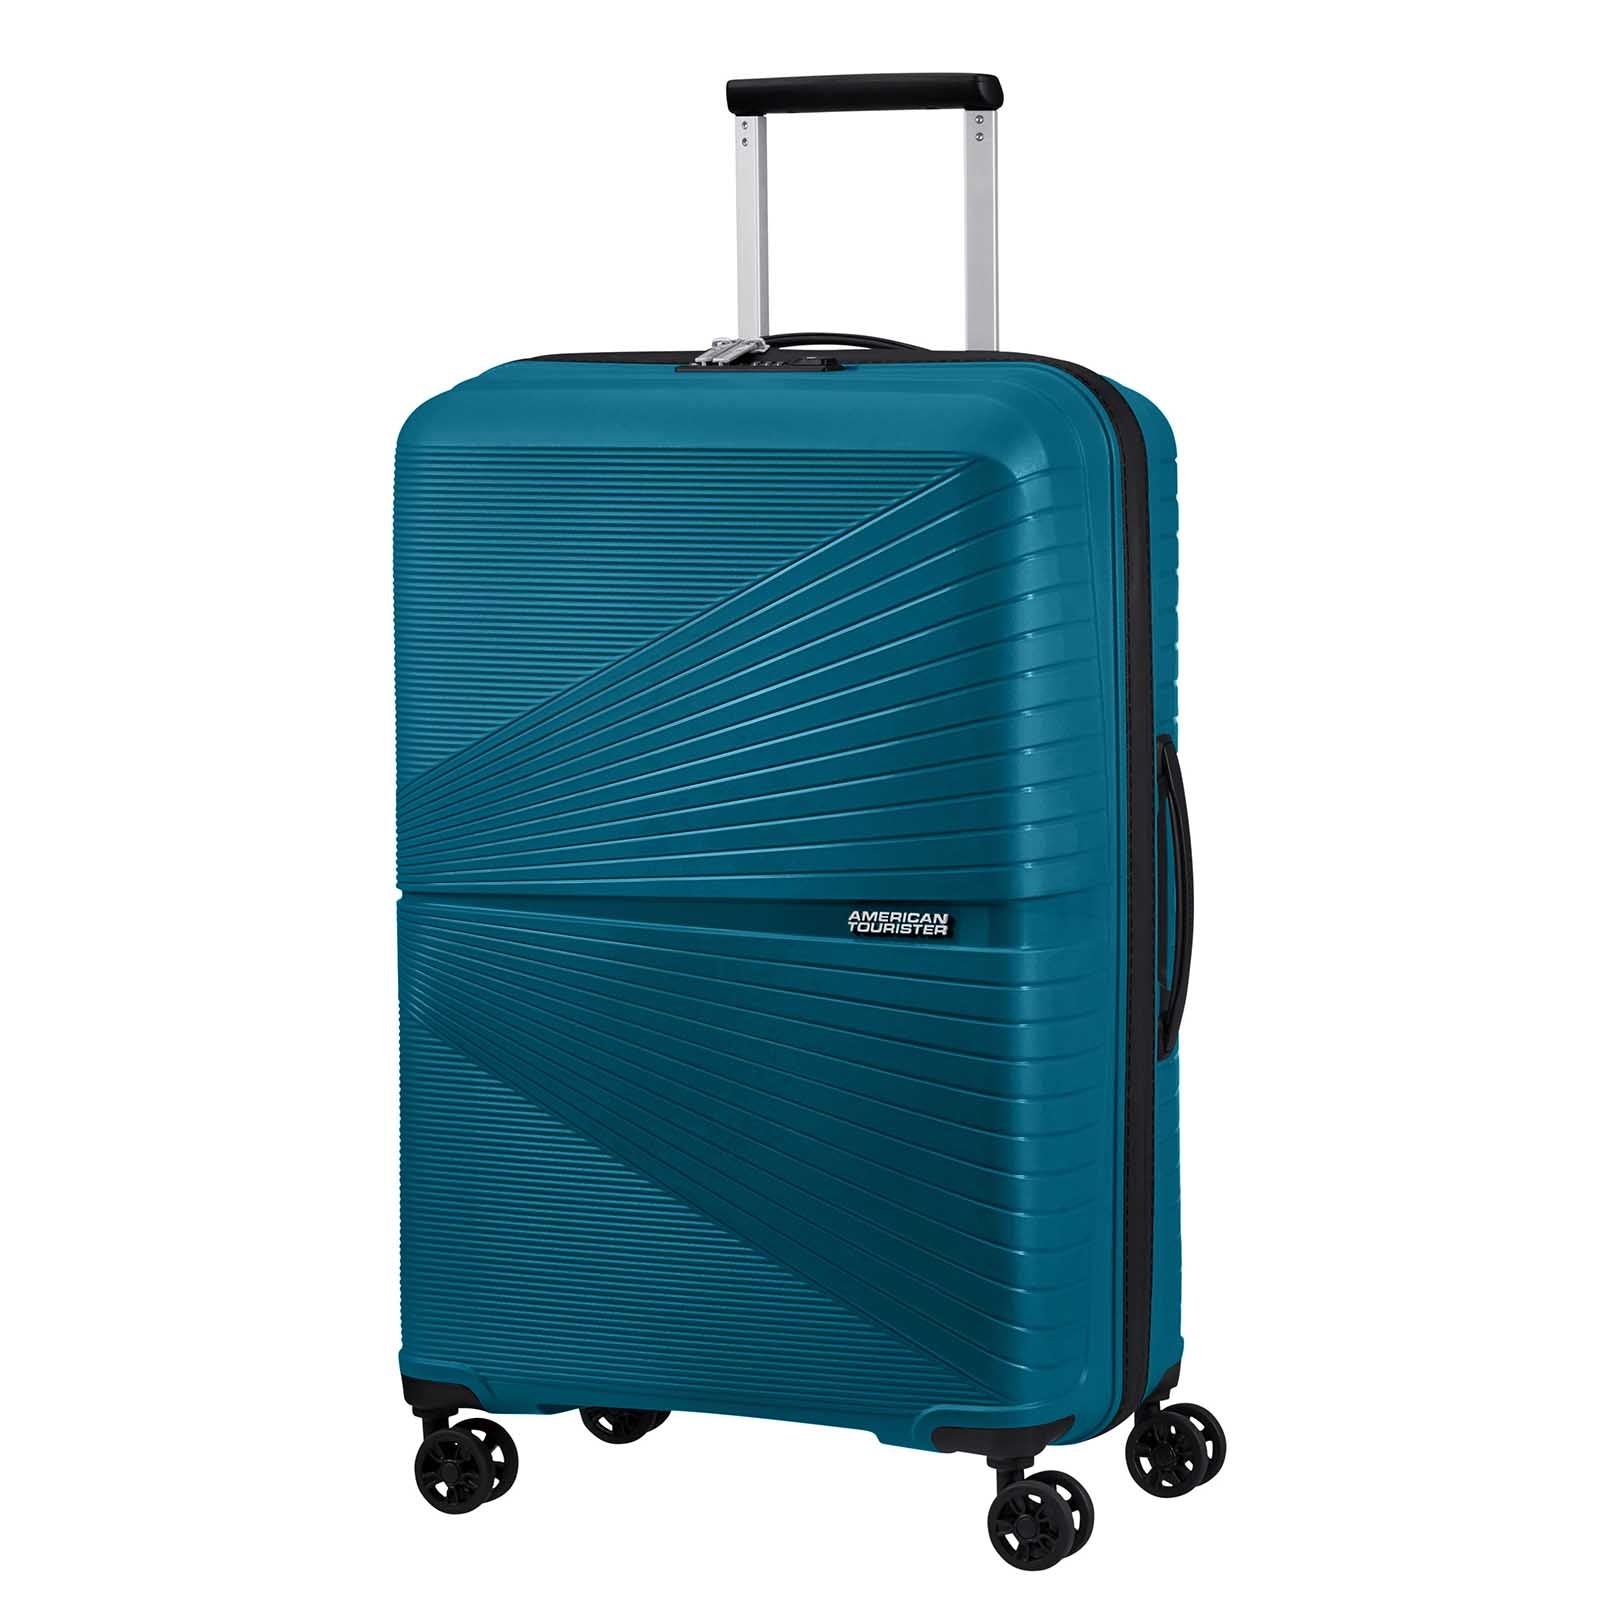 American-Tourister-Airconic-67cm-Suitcase-Deep-Ocean-Front-Angle